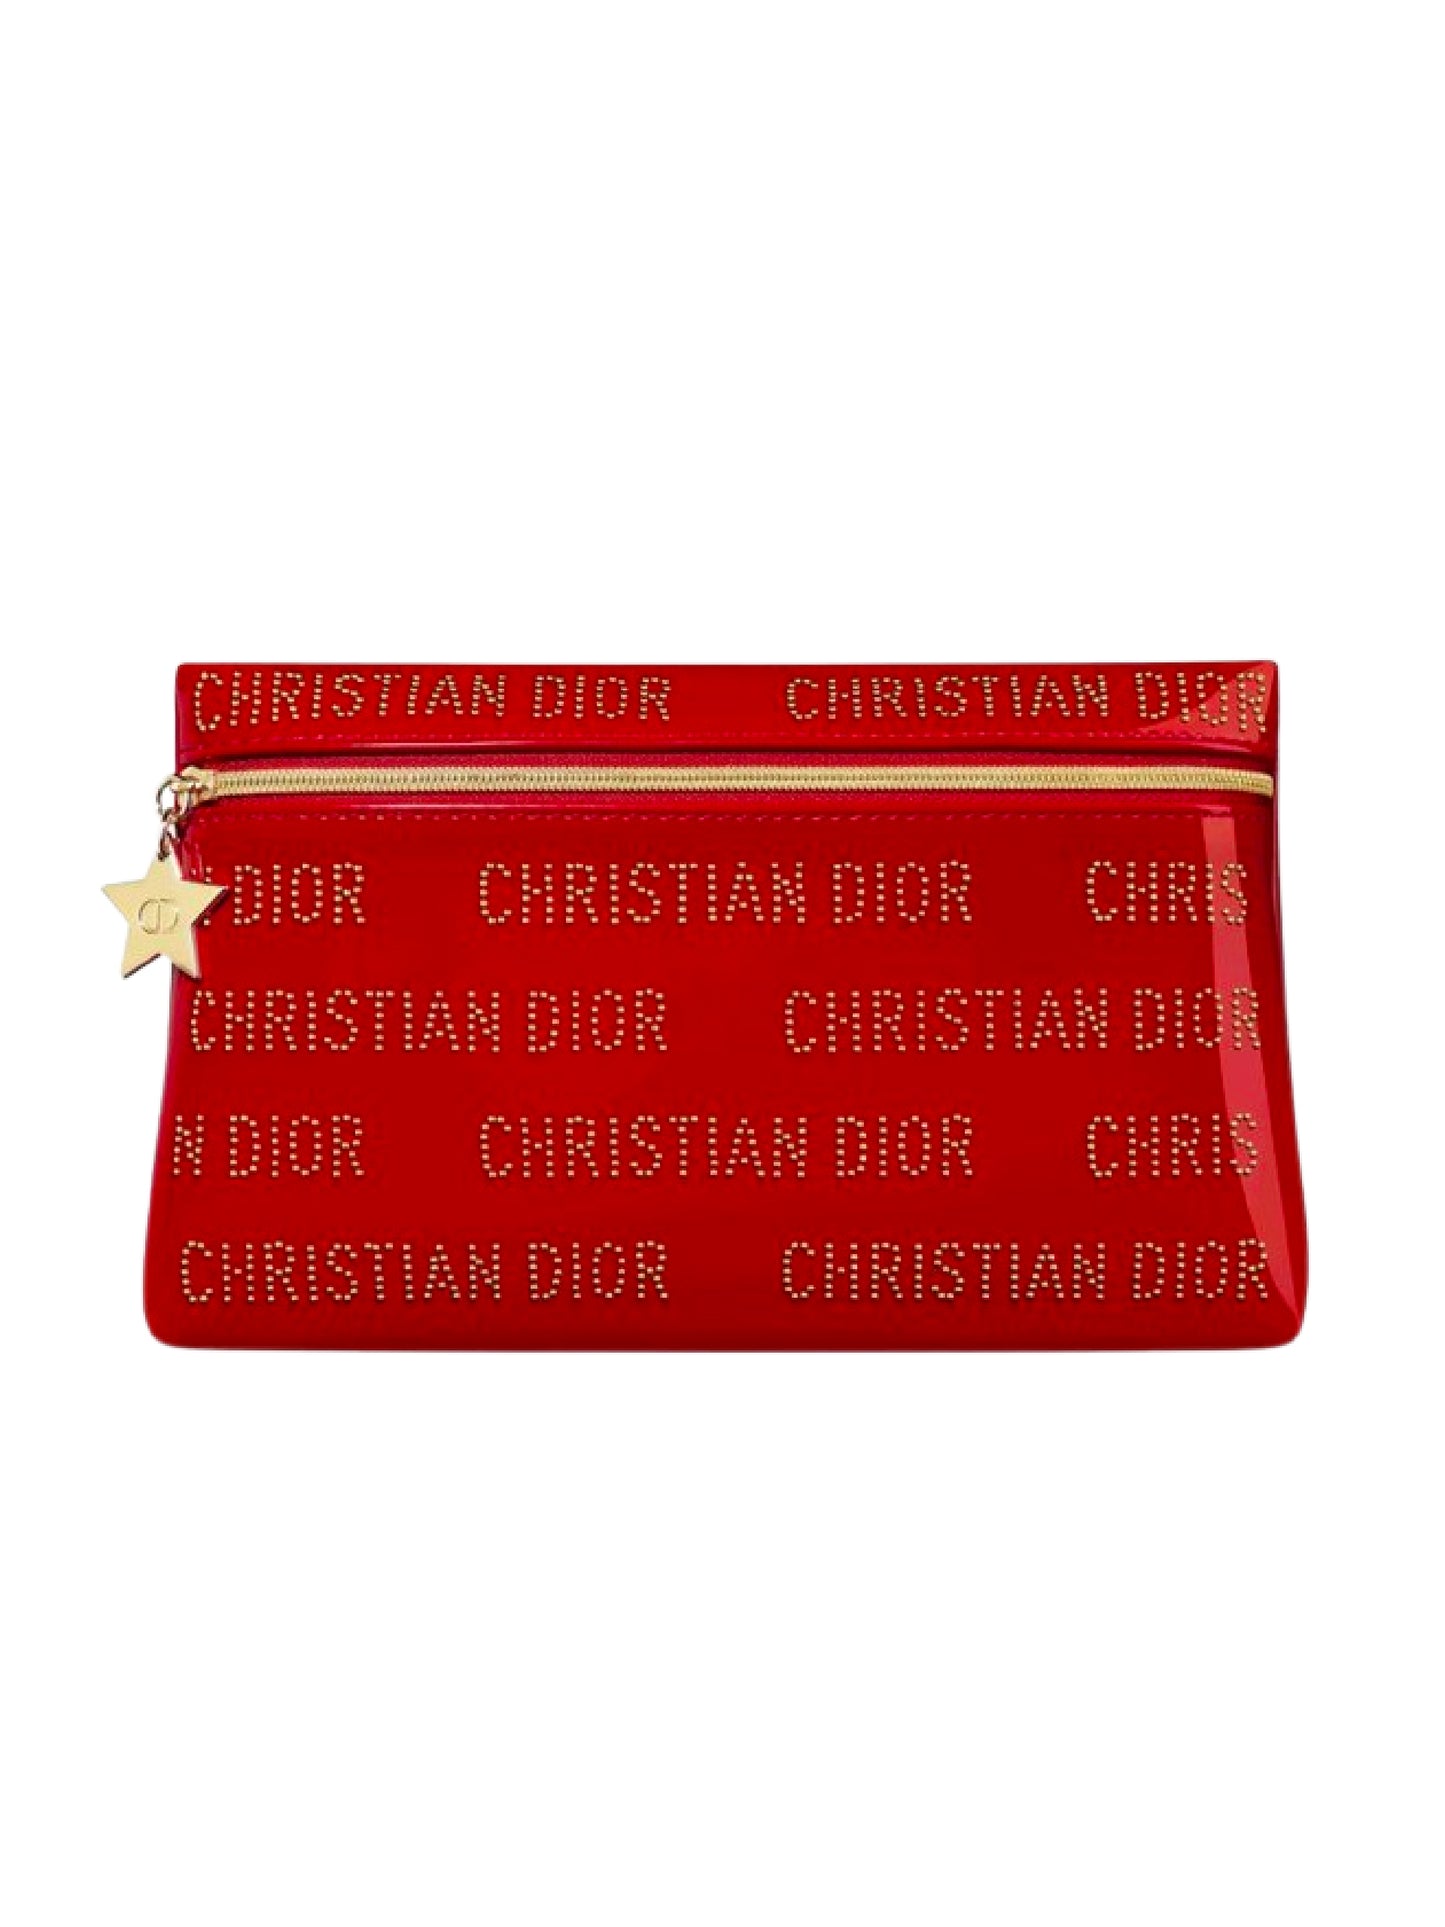 Dior Beauty Red Bag